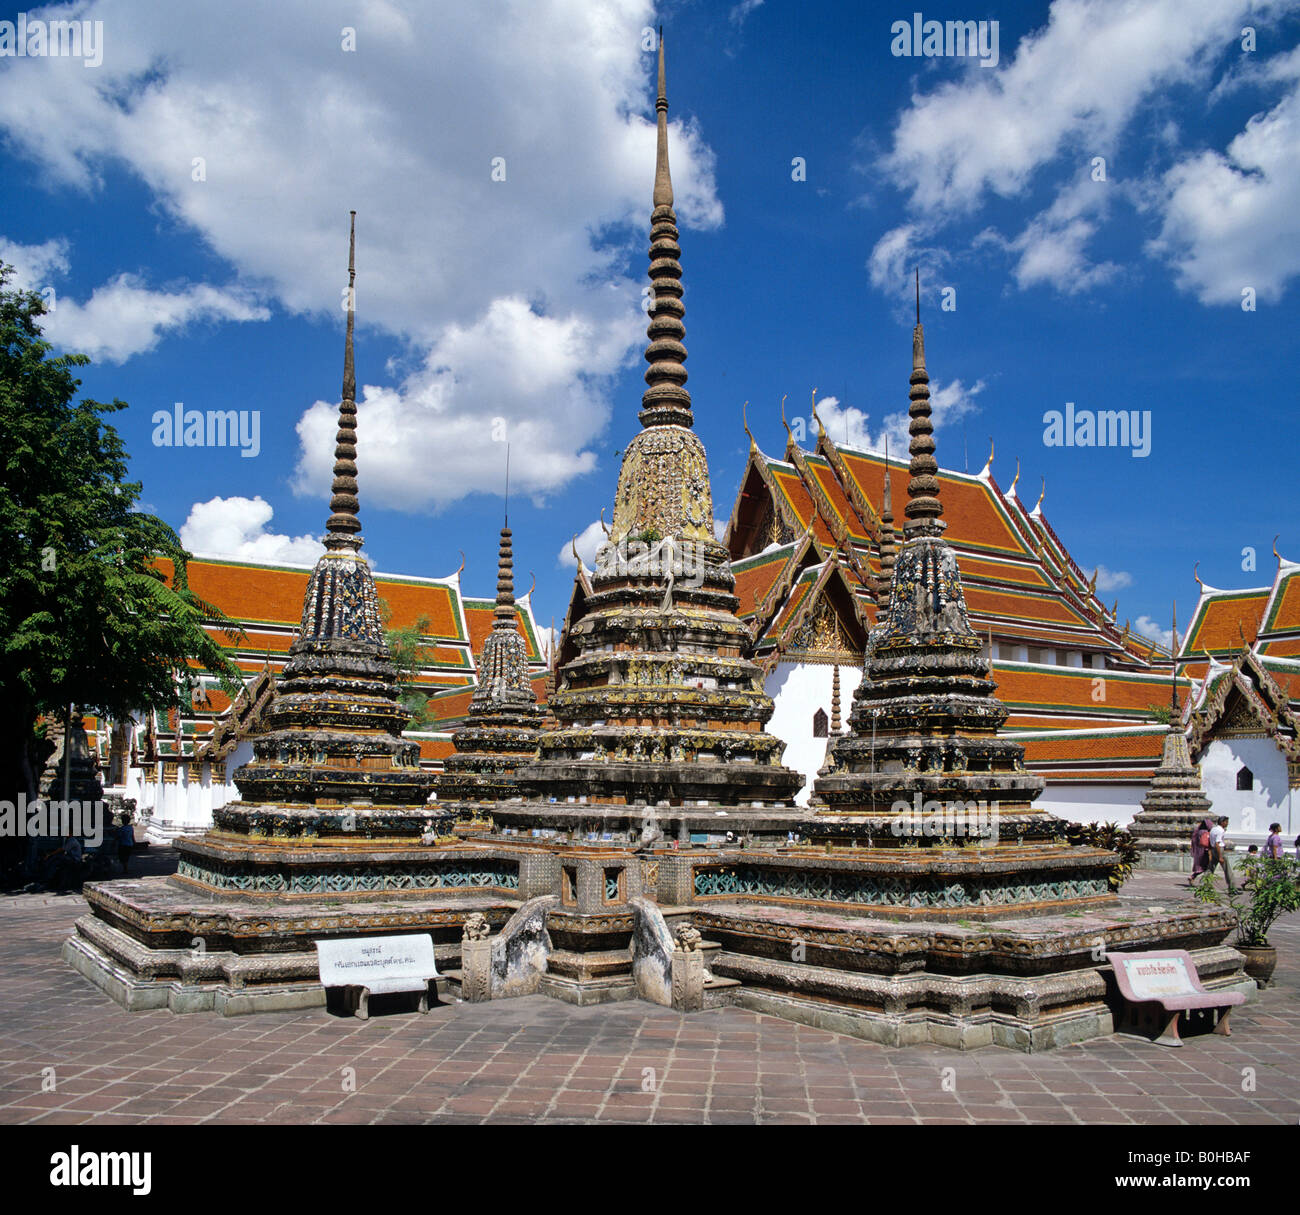 Wat Pho Temple of the Reclining Buddha, temple site, Chedis, Bangkok, Thailand, Southeast Asia Stock Photo